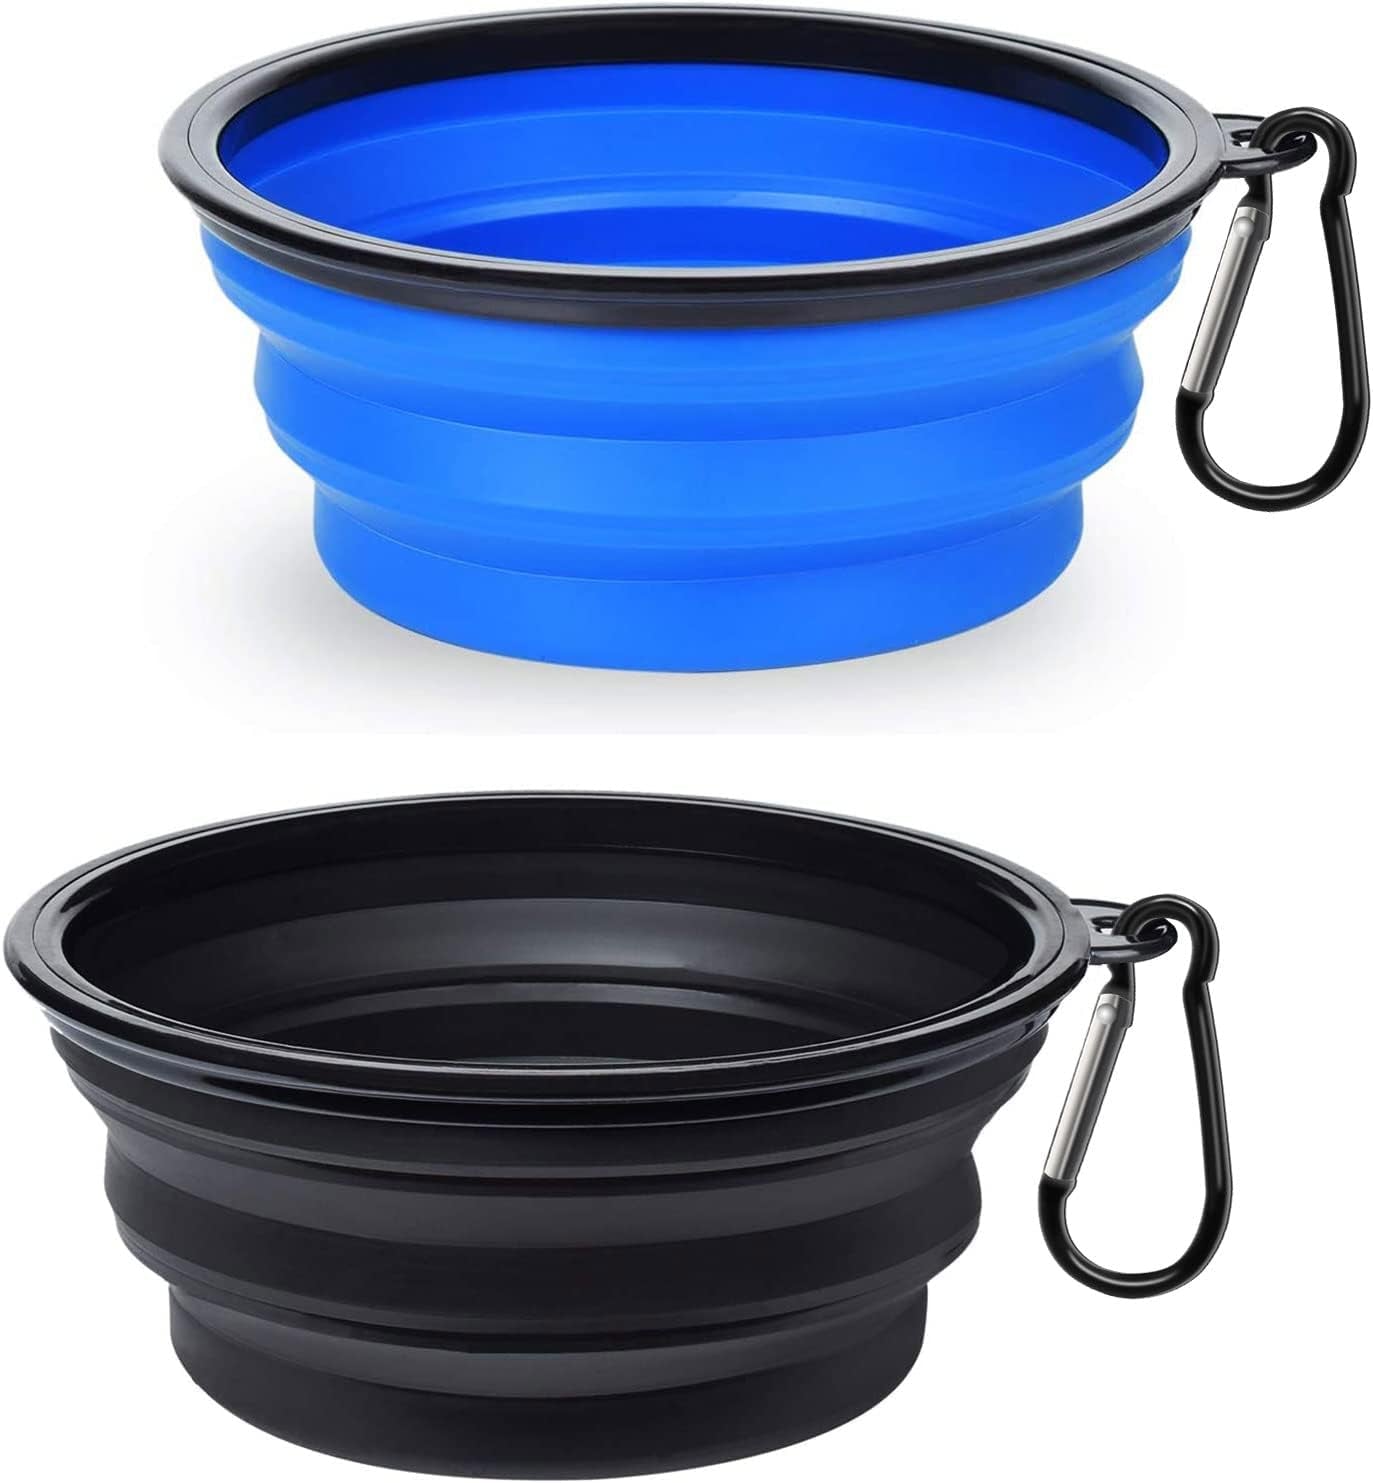 2-Pack Silicone Collapsible Dog Bowls, BPA Free Dishwasher Safe, Portable Foldable Expandable Travel Bowl, Food Water Feeding Cup Dish for Dogs Cats with 2 Carabiners (Blue, Black)